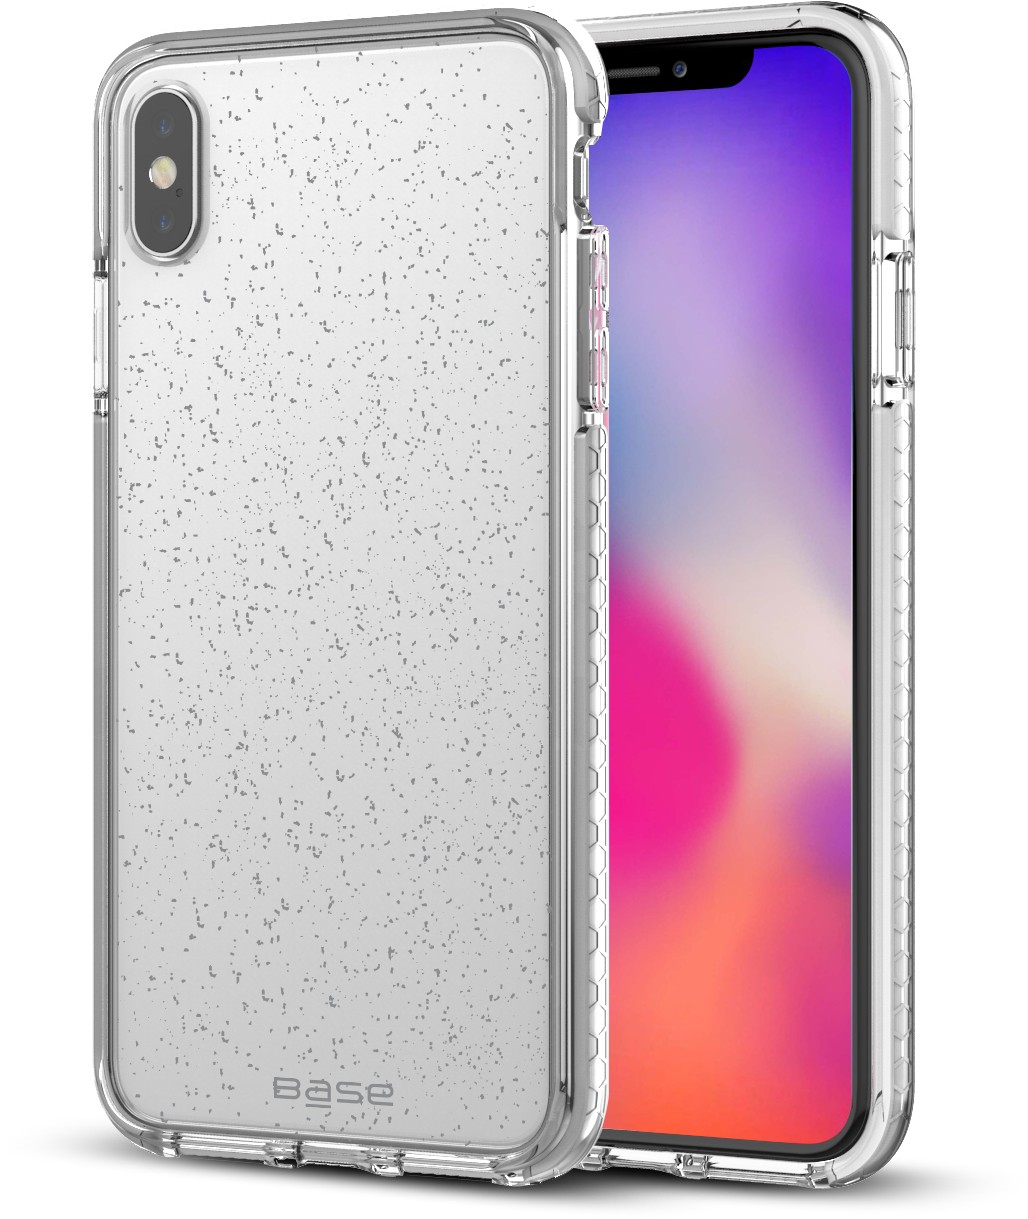 Base BORDERLINE - GLIMMER DUAL BORDER IMPACT PROTECTION FOR iPhone X Max - SILVER